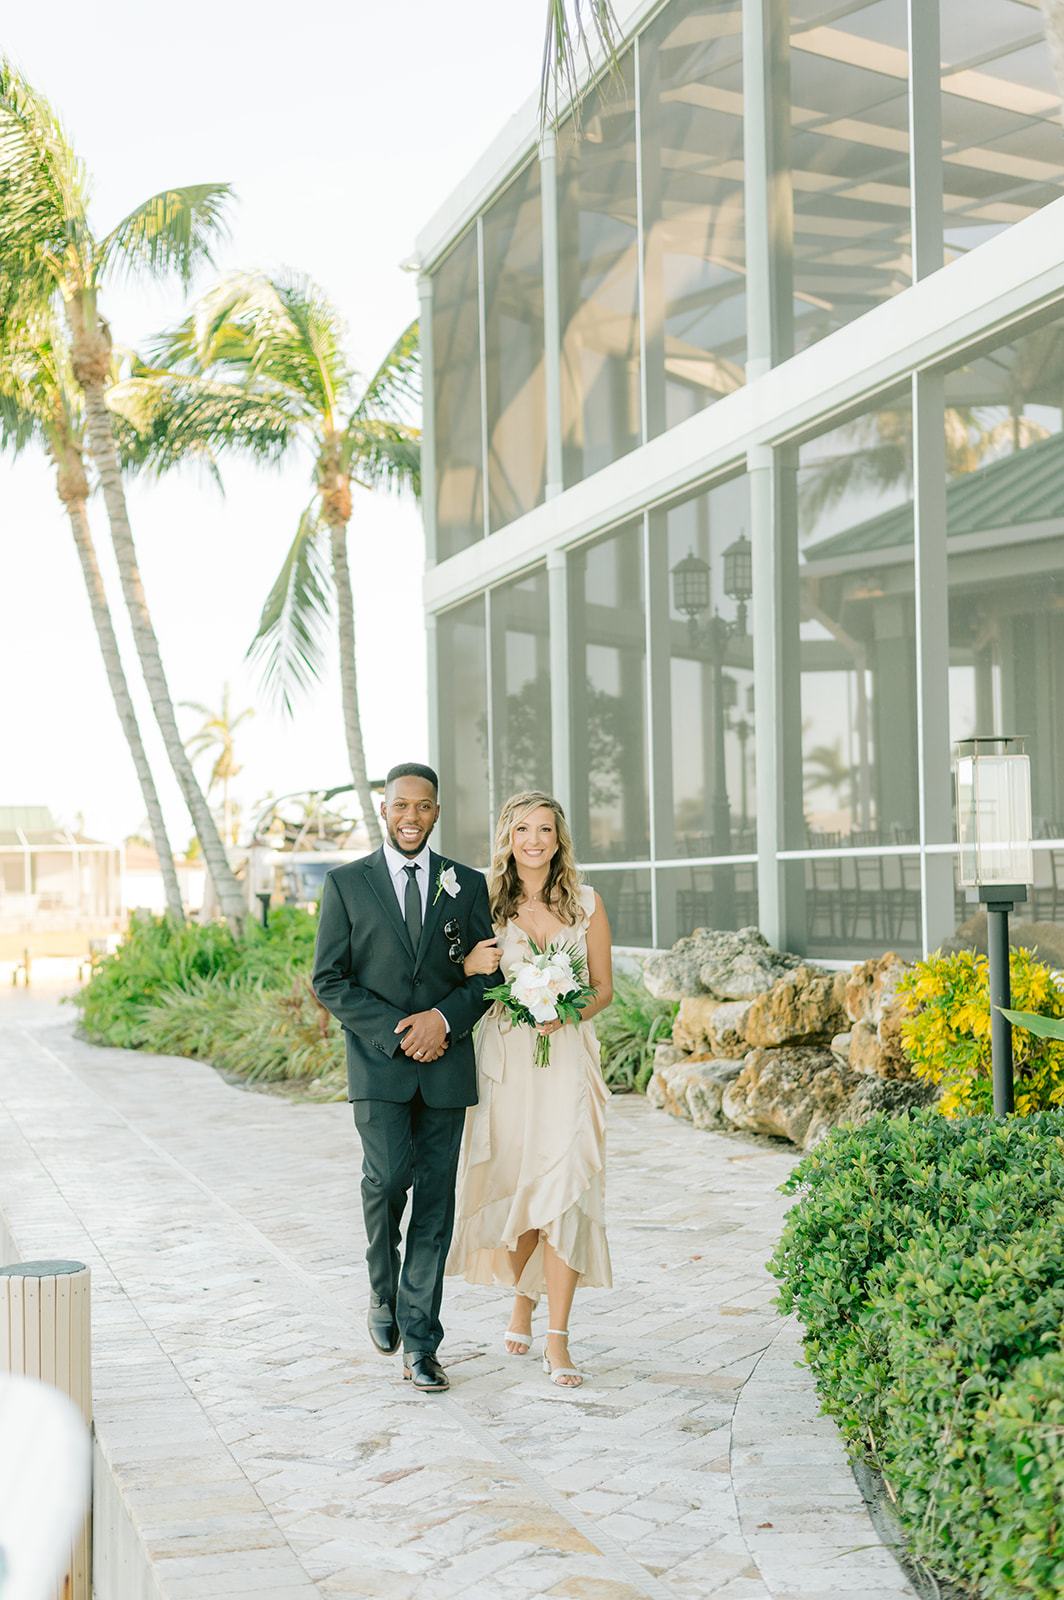 Classic and Timeless Marco Island Wedding Photography - Cherish Your Memories Forever
